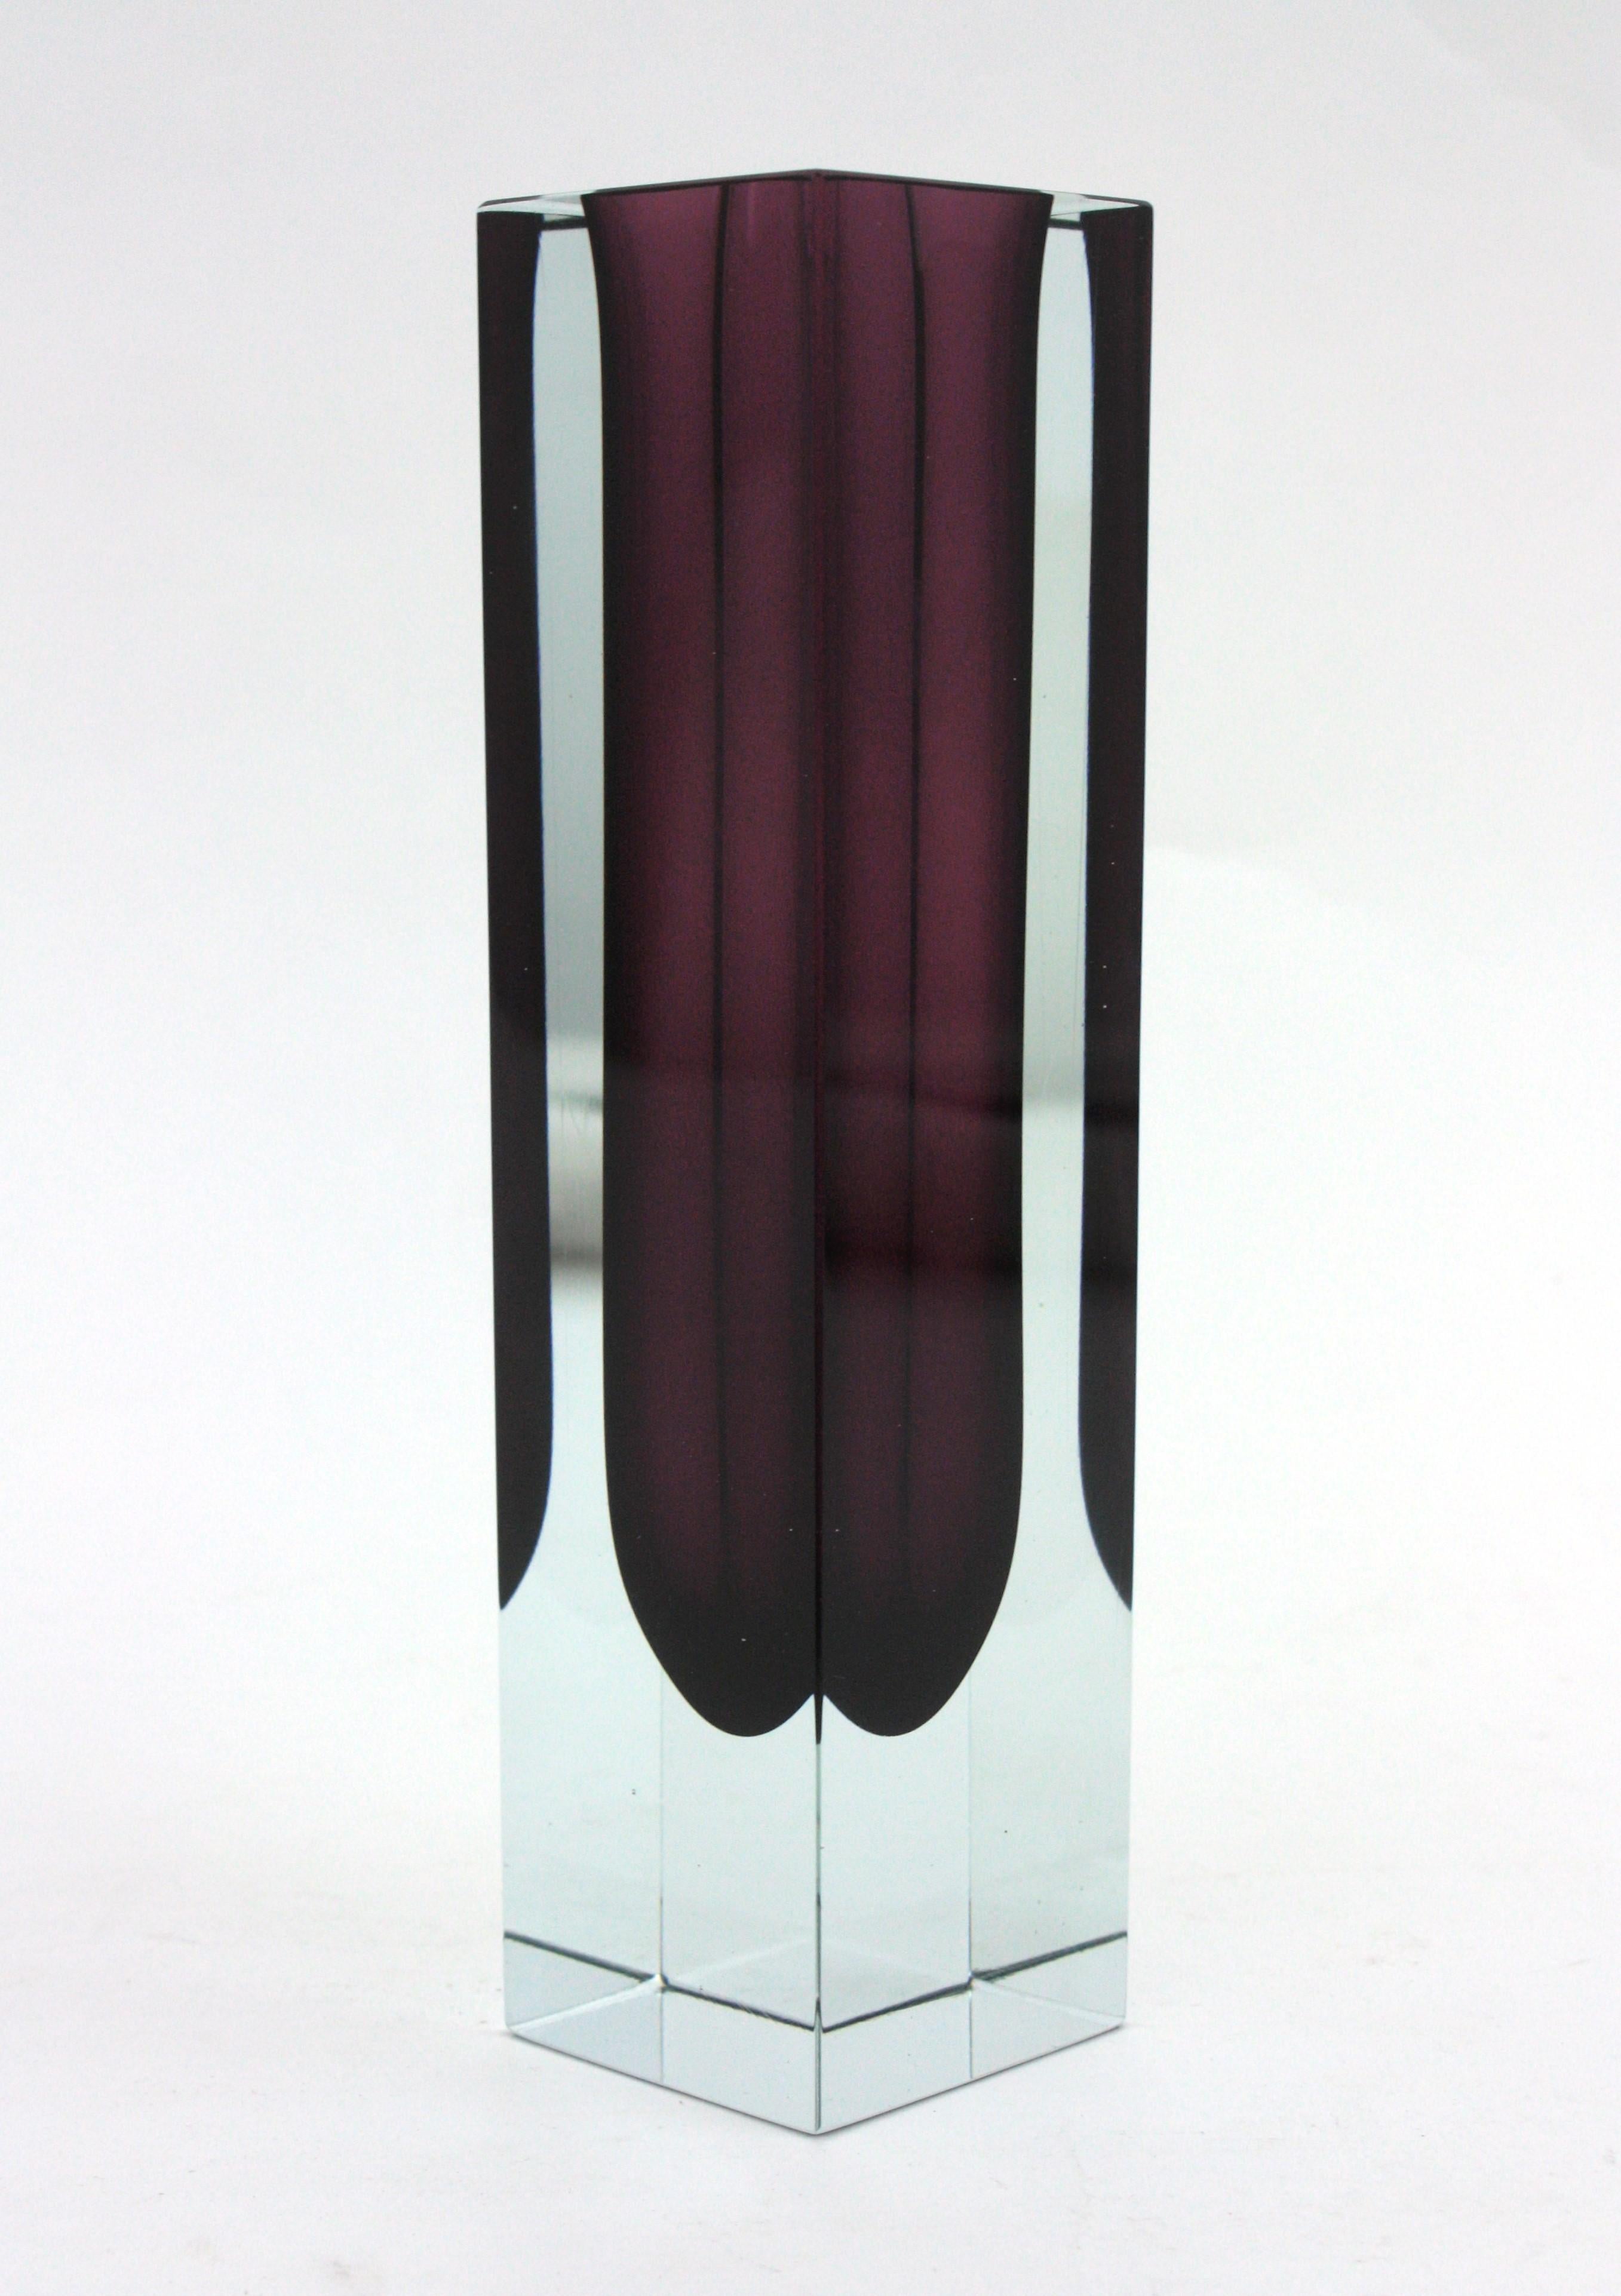 Giant Flavio Poli Murano Sommerso Purple Clear Faceted Art Glass Vase For Sale 4